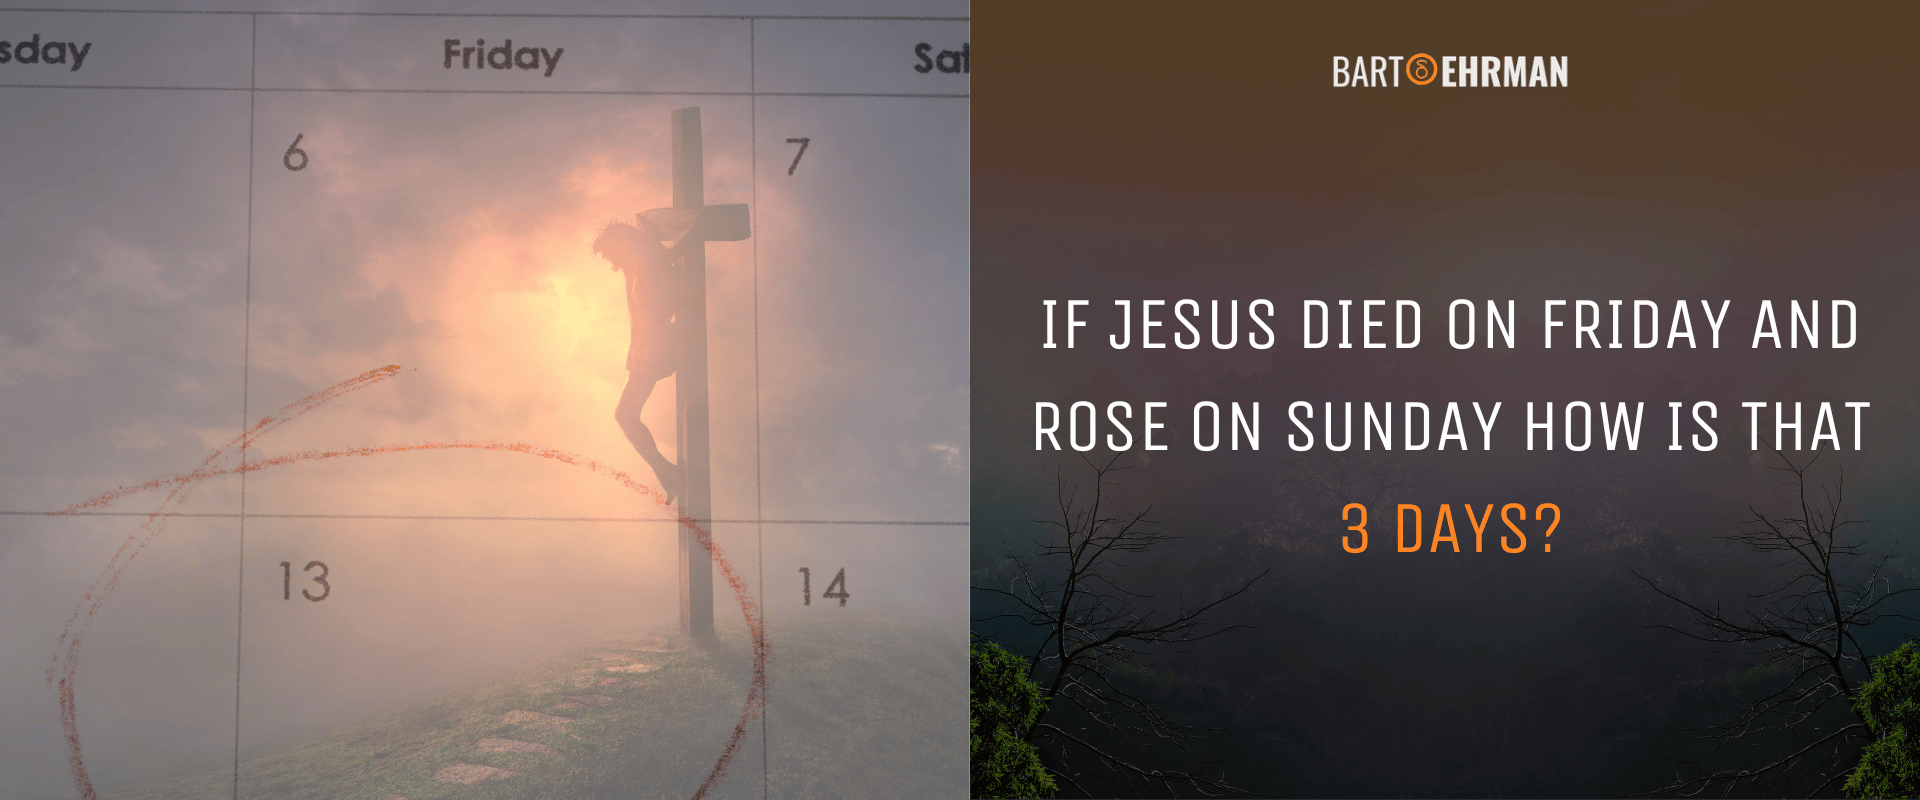 If Jesus Died on Friday and Rose on Sunday How is That 3 Days